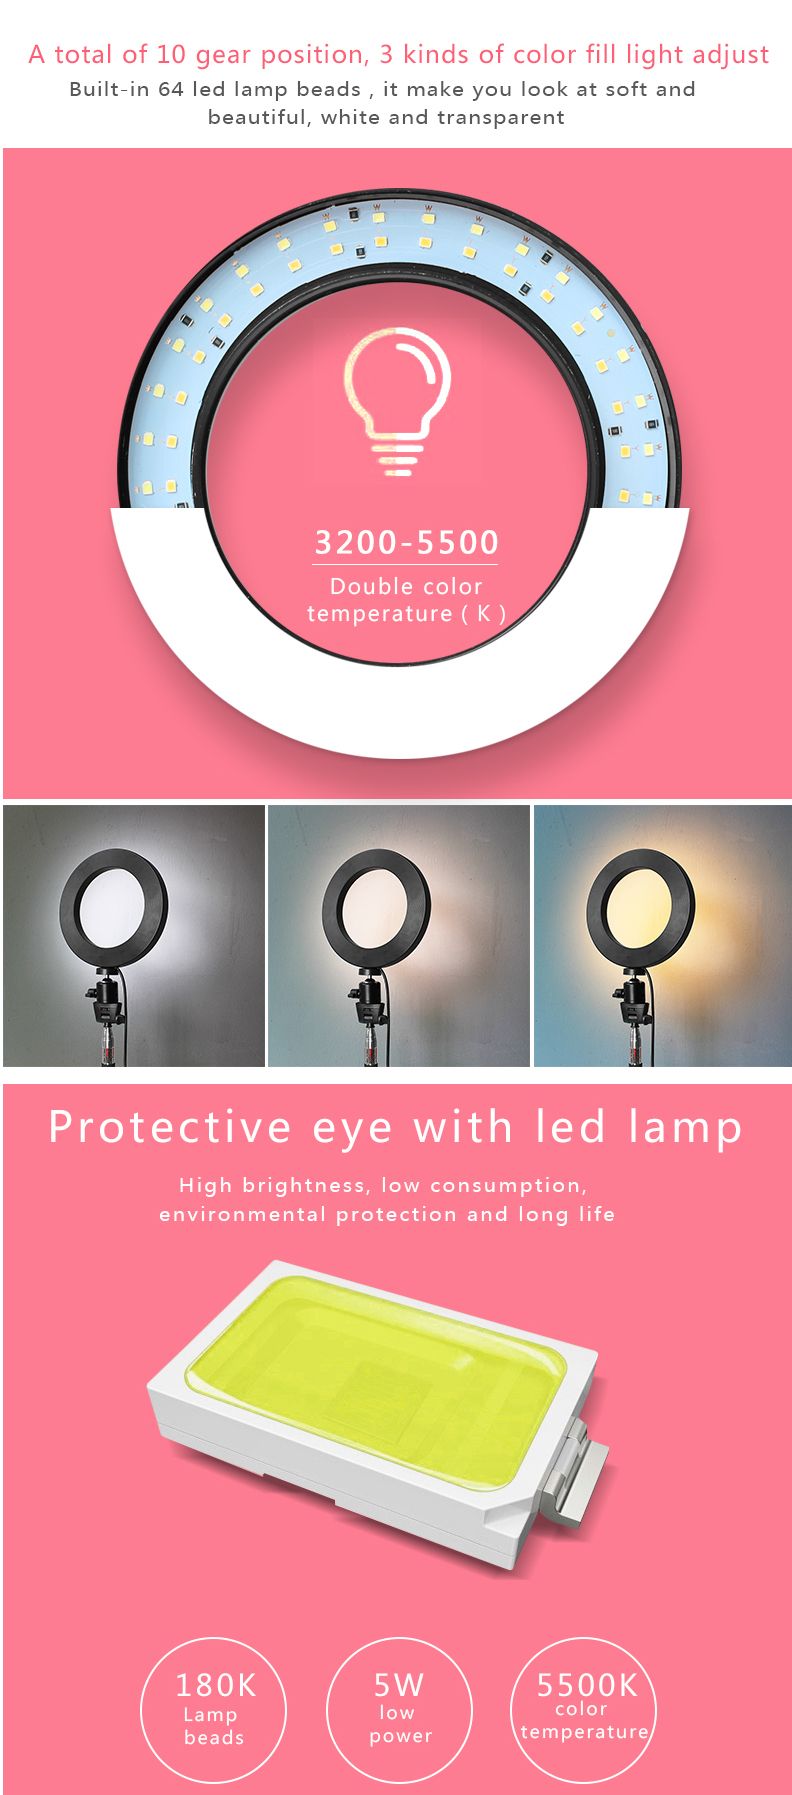 Yingnuost-16CM-Dimmable-3500-5500k-Video-Ring-Light-for-Tik-Tok-Youtube-Live-Streaming-1568903